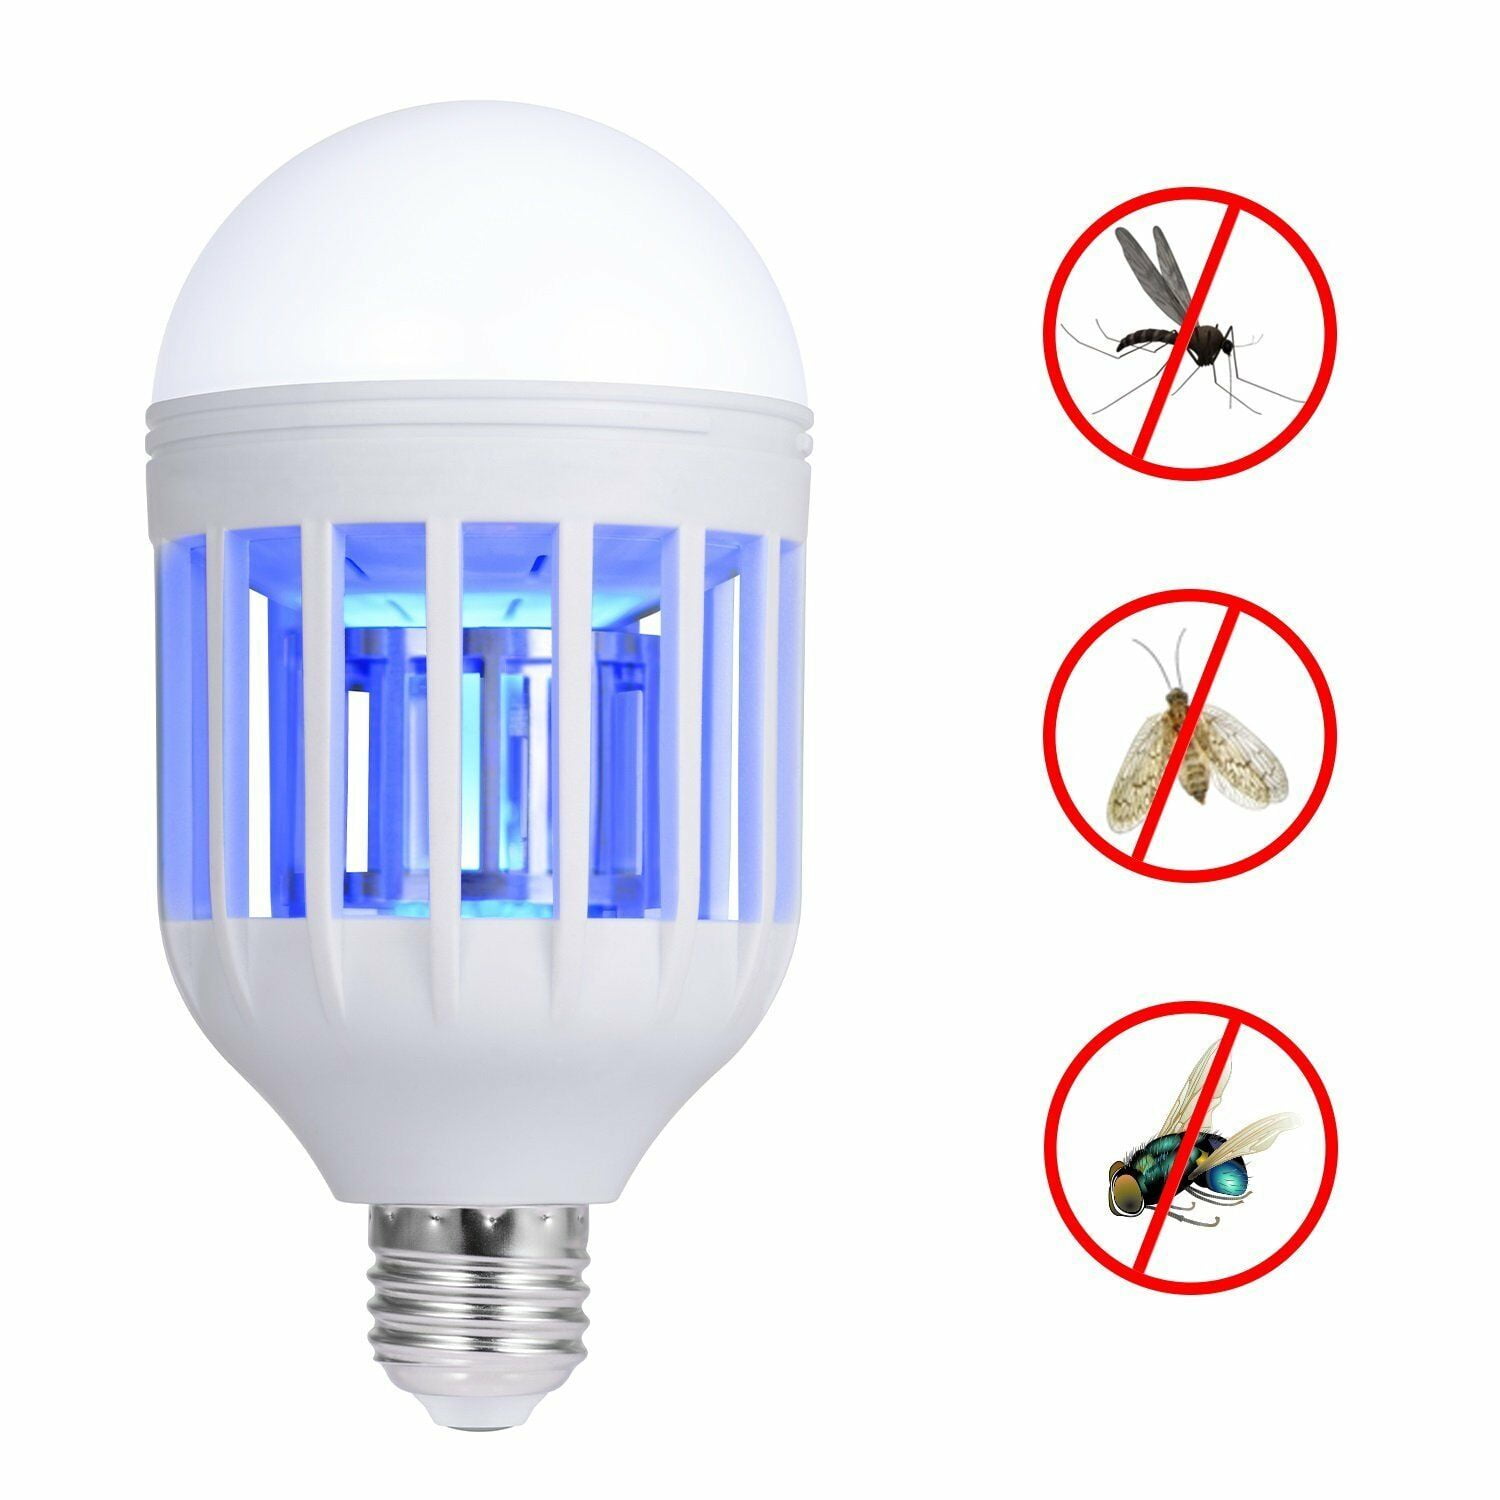 Gogogu 2 Pack Bug Zapper Light Bulbs Fits 110V E27 Light Bulb Socket Suit for Outdoor and Indoor 2 in 1 Mosquito Killer Lamp 